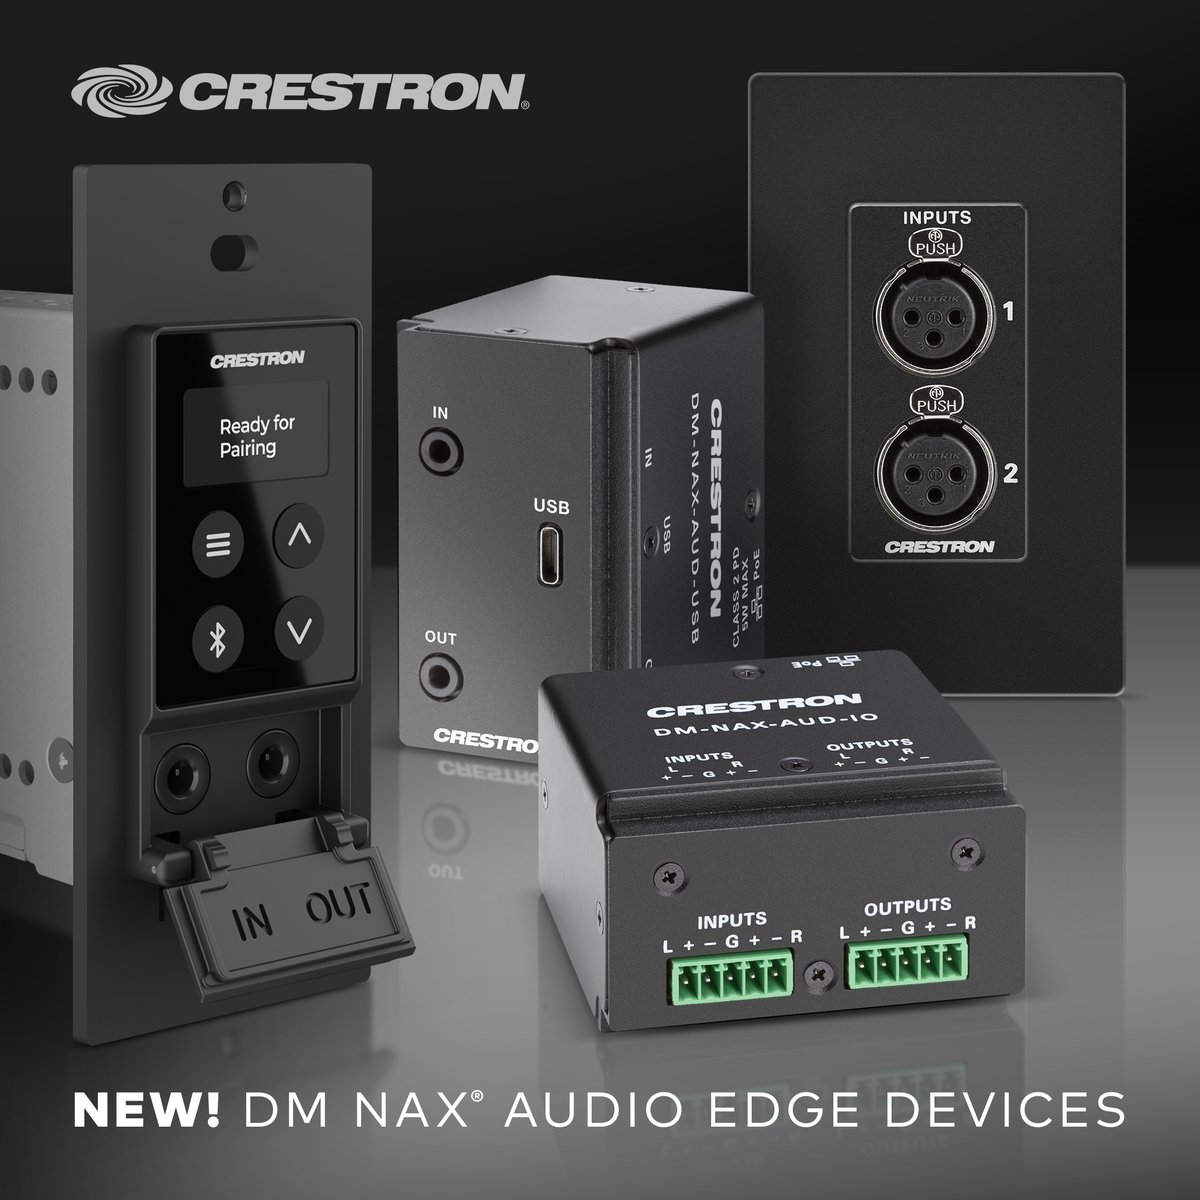 More ways to simplify content distribution in enterprise, educational, hospitality, & retail projects. DM NAX Edge Devices are the easiest way to add audio-over-IP to any space. Make these your first-round draft pick for the perfect audio experience. 🏈 ow.ly/Ijce50Rj9lJ